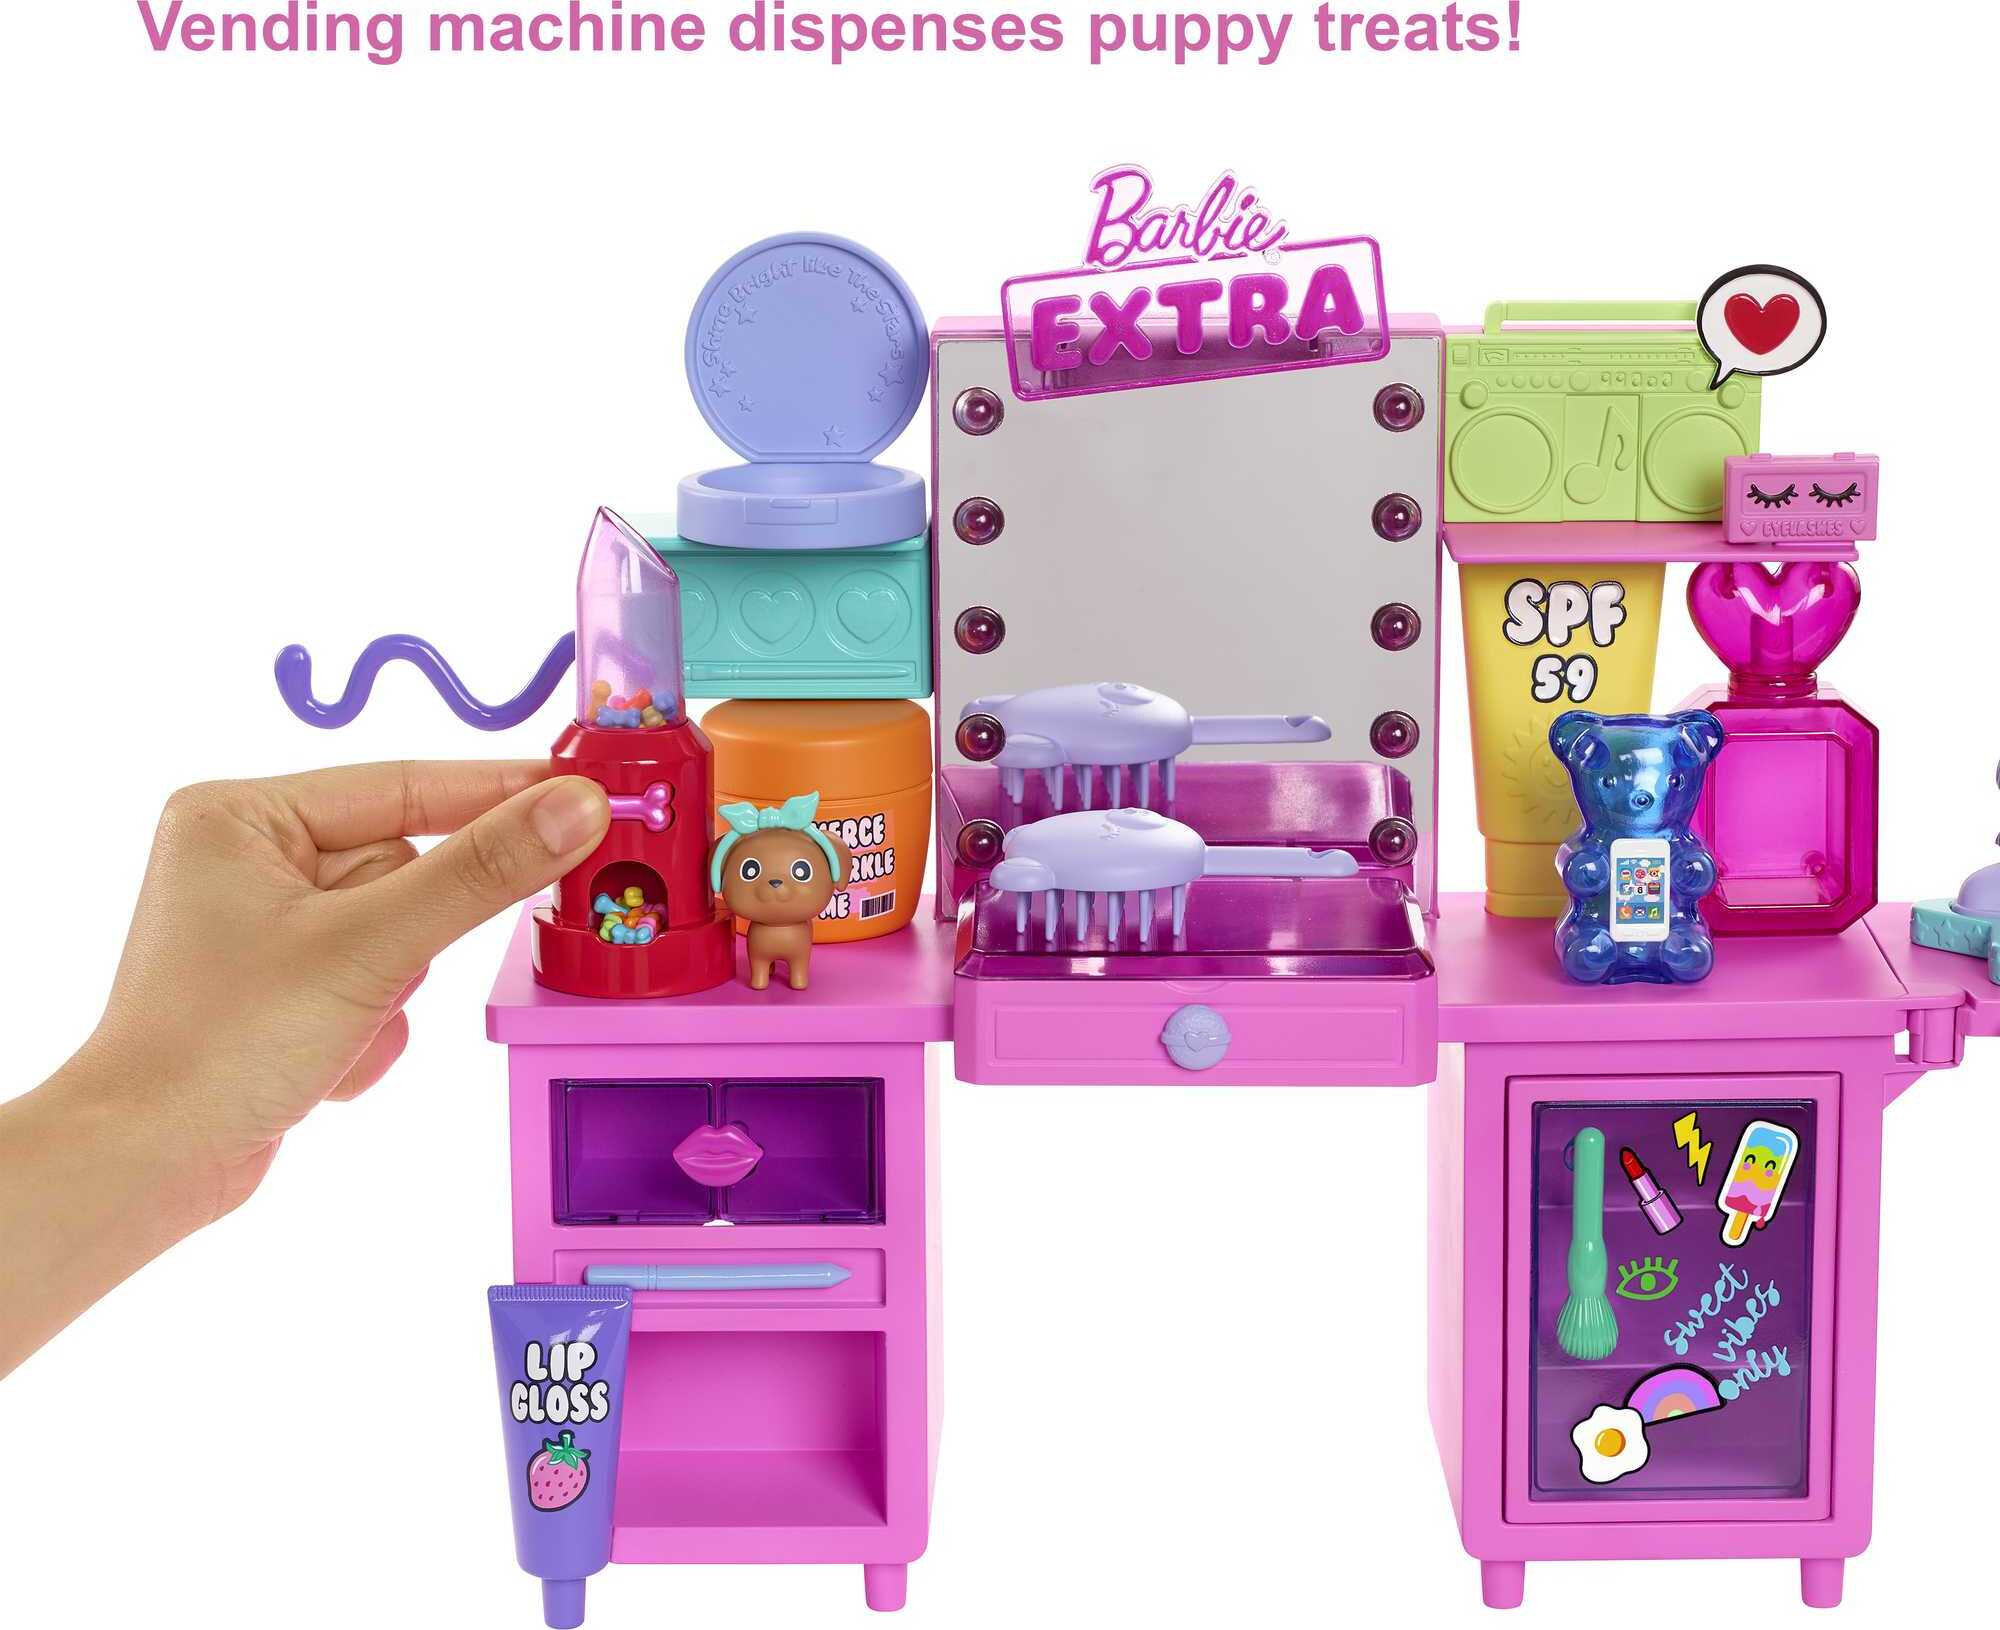 Barbie Extra Fashion Doll and Vanity Playset with 45+ Accessories, Vanity and Puppy - image 5 of 8